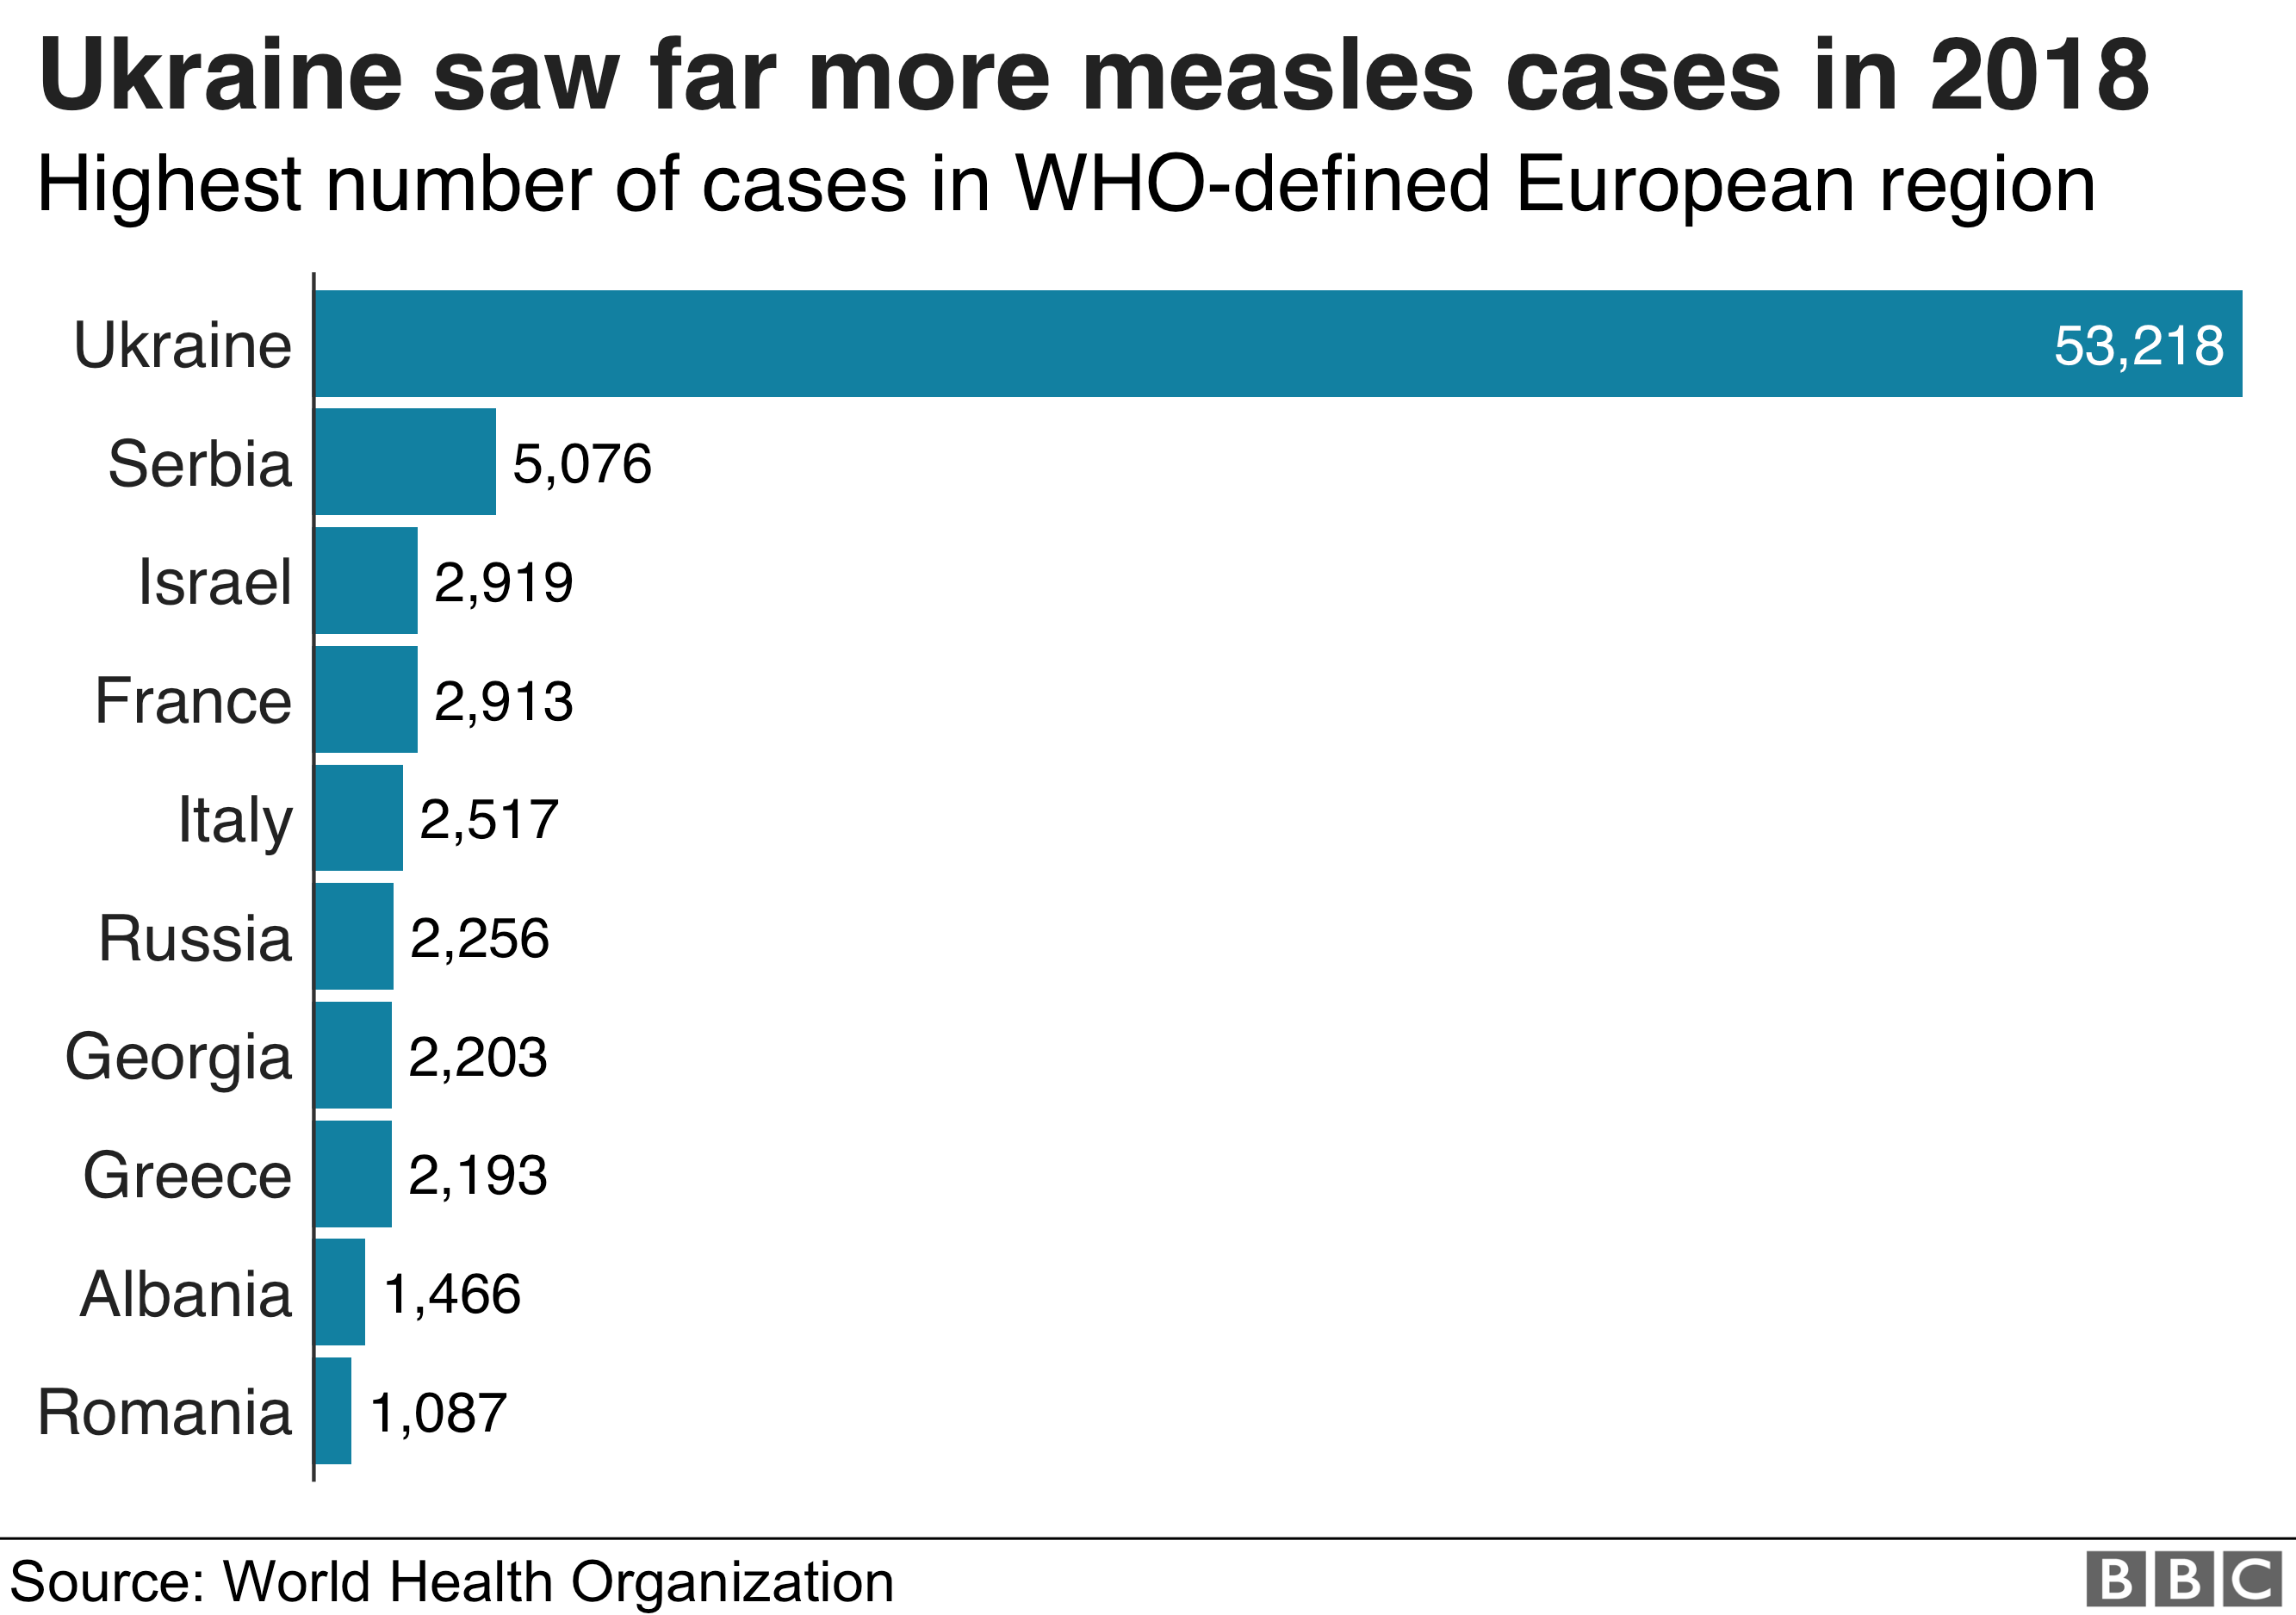 Measles Chart Example